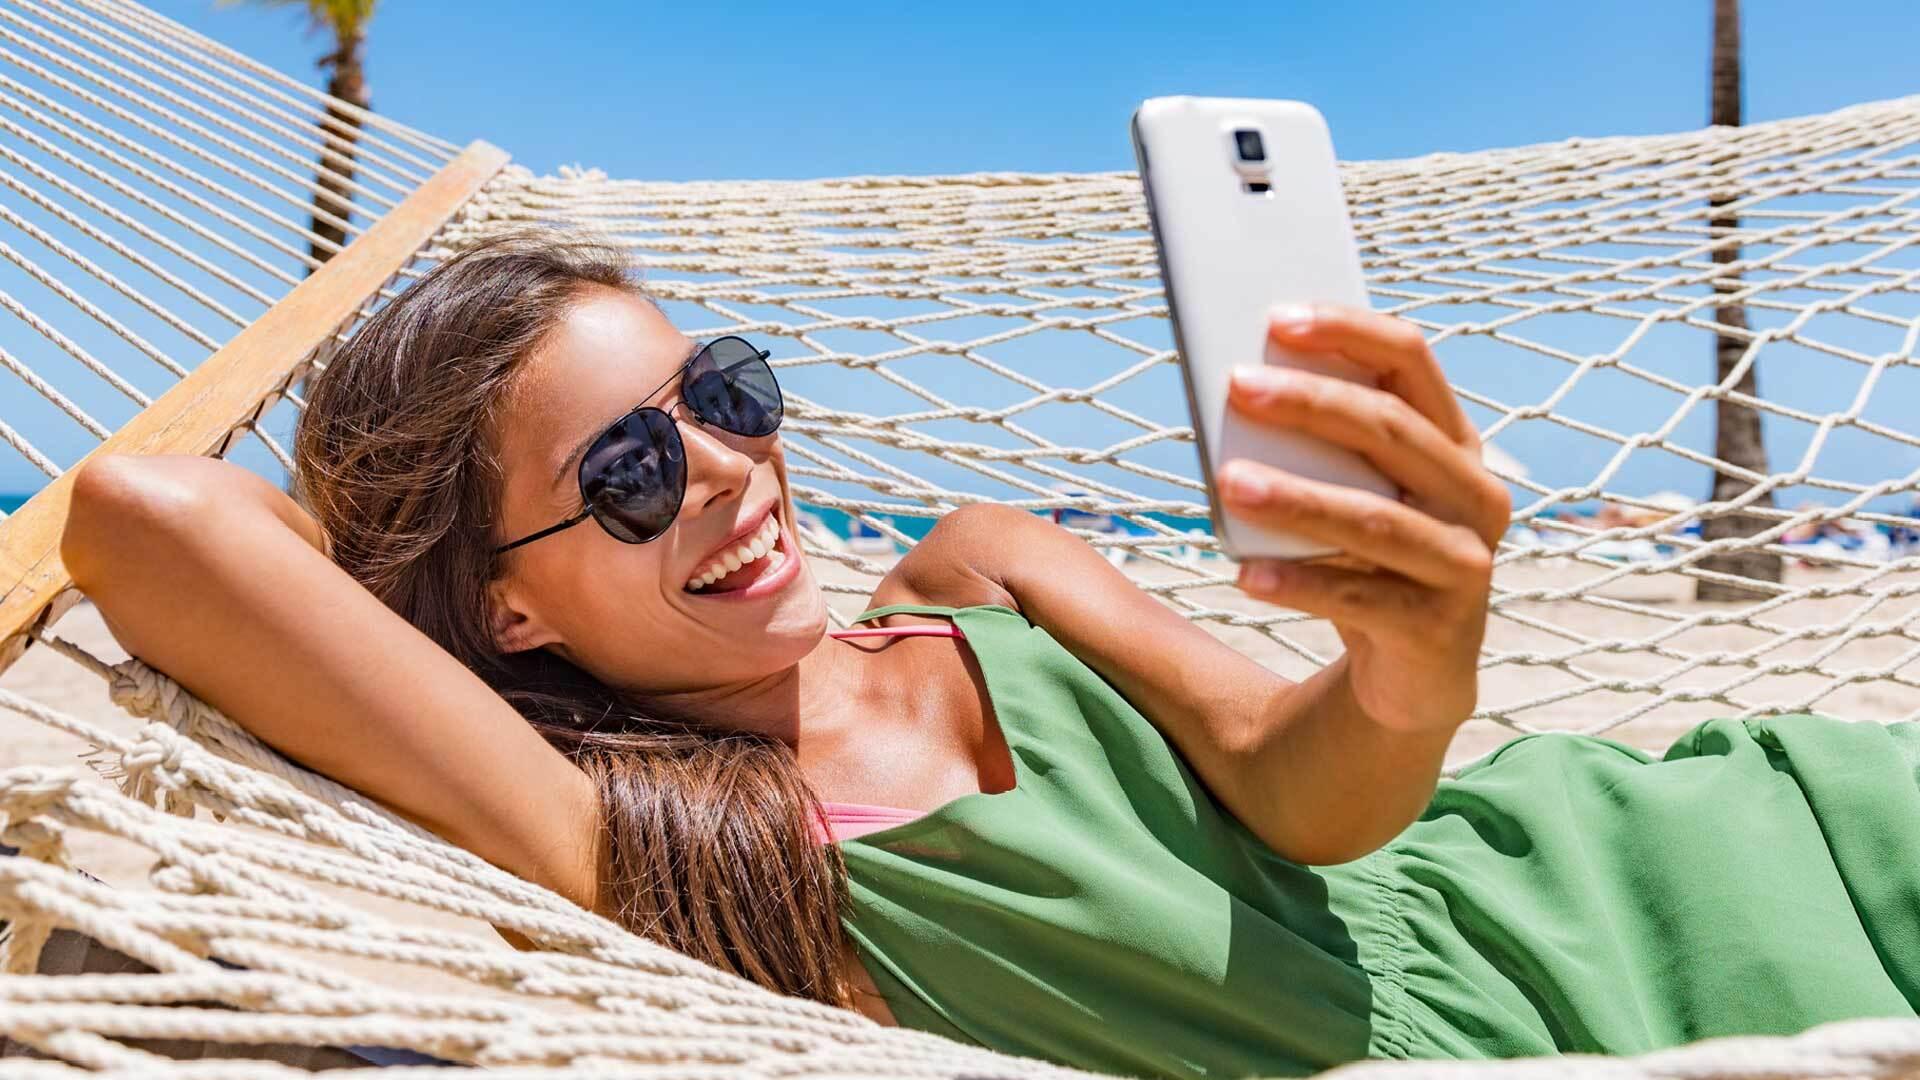 A woman laying in a hammock smiles at her phone